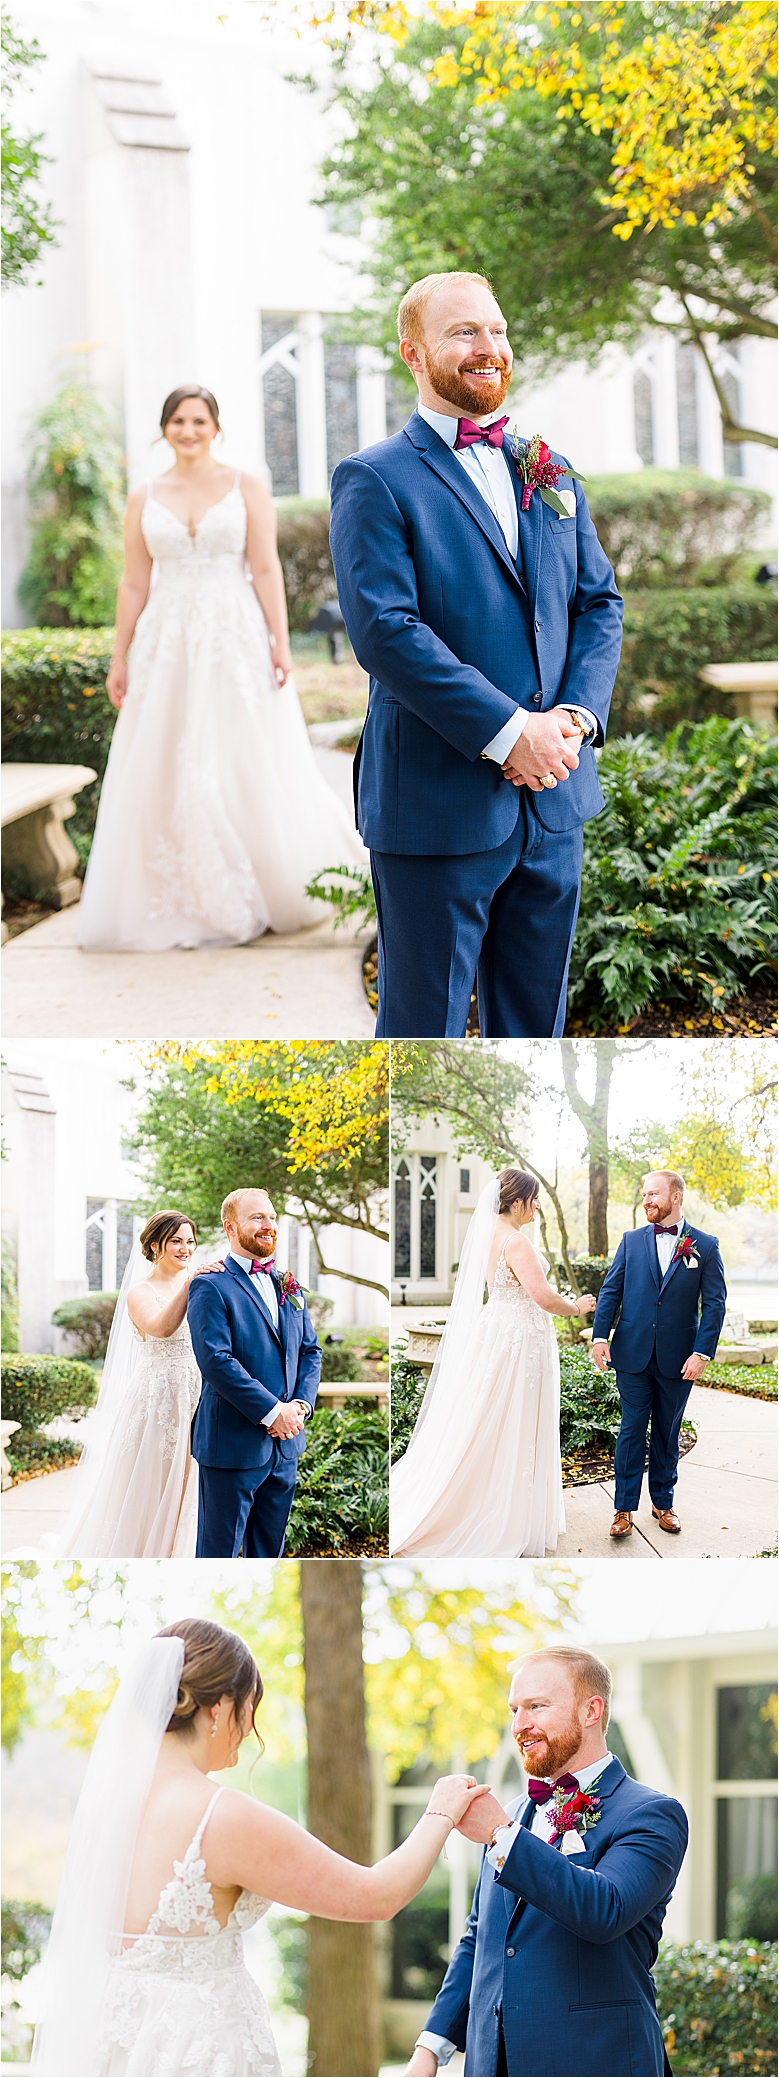 A happy groom waits for his bride as she walks up behind him and they share a first look before their Alamo Heights United Methodist Church Wedding on a warm, sunny December Morning